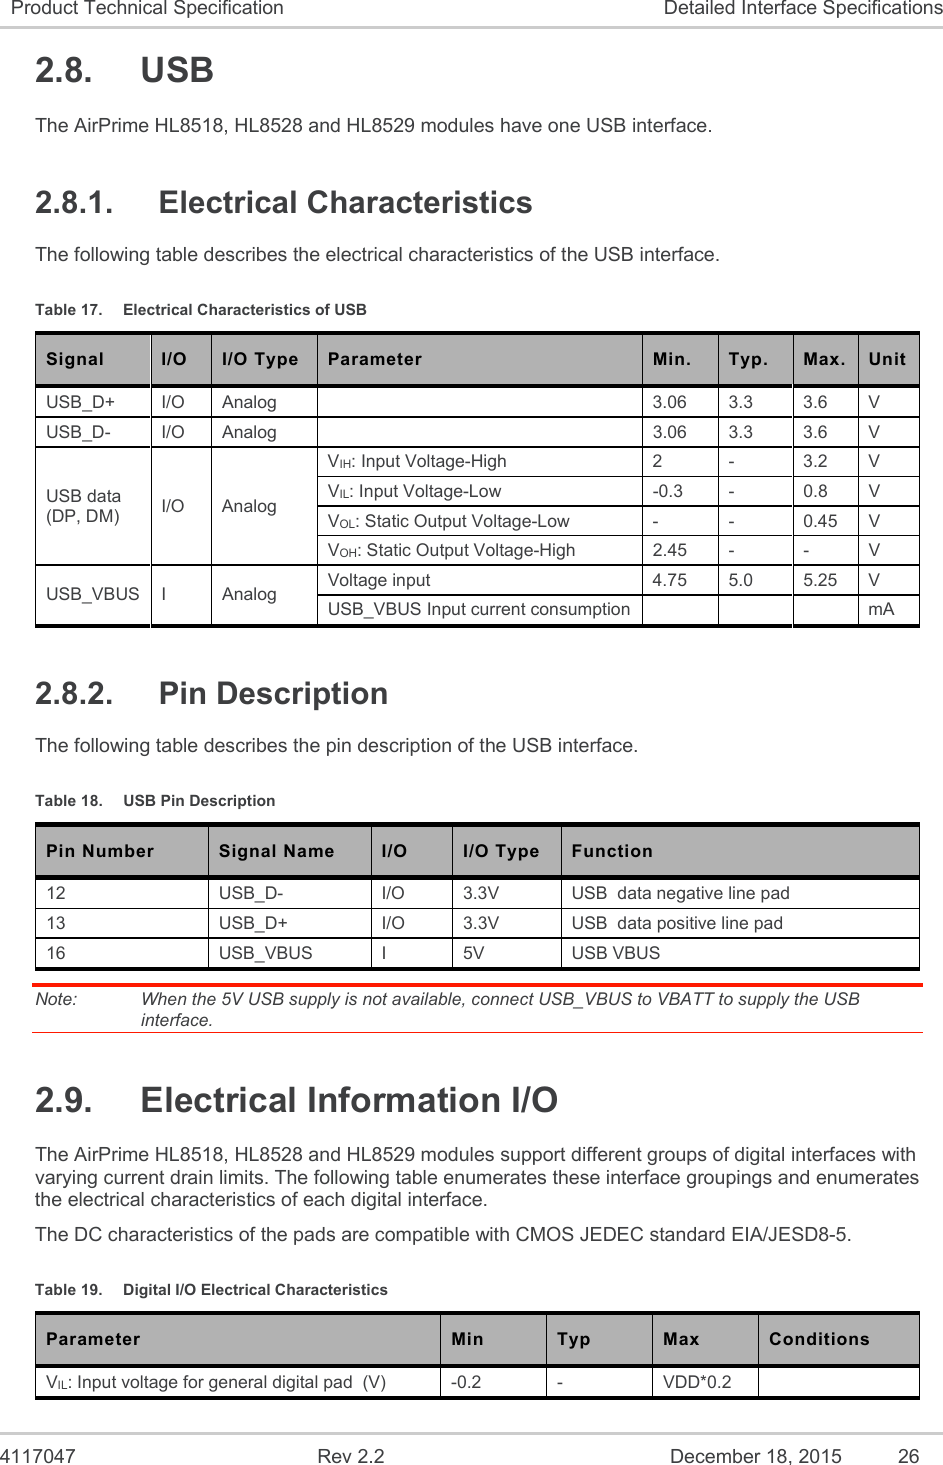  4117047  Rev 2.2  December 18, 2015  26 Product Technical Specification  Detailed Interface Specifications 2.8.  USB The AirPrime HL8518, HL8528 and HL8529 modules have one USB interface. 2.8.1.  Electrical Characteristics The following table describes the electrical characteristics of the USB interface. Table 17.  Electrical Characteristics of USB  Signal  I/O  I/O Type  Parameter  Min.  Typ.  Max.  Unit USB_D+  I/O  Analog    3.06  3.3  3.6  V USB_D-  I/O  Analog    3.06  3.3  3.6  V USB data      (DP, DM)  I/O  Analog VIH: Input Voltage-High  2  -  3.2  V VIL: Input Voltage-Low  -0.3  -  0.8  V VOL: Static Output Voltage-Low  -  -  0.45  V VOH: Static Output Voltage-High  2.45  -  -  V USB_VBUS  I  Analog  Voltage input  4.75  5.0  5.25  V USB_VBUS Input current consumption      mA 2.8.2.  Pin Description The following table describes the pin description of the USB interface. Table 18.  USB Pin Description Pin Number  Signal Name  I/O  I/O Type  Function 12  USB_D-  I/O  3.3V  USB  data negative line pad 13  USB_D+  I/O  3.3V  USB  data positive line pad 16  USB_VBUS  I  5V  USB VBUS Note:   When the 5V USB supply is not available, connect USB_VBUS to VBATT to supply the USB interface. 2.9.  Electrical Information I/O The AirPrime HL8518, HL8528 and HL8529 modules support different groups of digital interfaces with varying current drain limits. The following table enumerates these interface groupings and enumerates the electrical characteristics of each digital interface. The DC characteristics of the pads are compatible with CMOS JEDEC standard EIA/JESD8-5. Table 19.  Digital I/O Electrical Characteristics Parameter  Min  Typ  Max  Conditions VIL: Input voltage for general digital pad  (V)  -0.2  -  VDD*0.2   